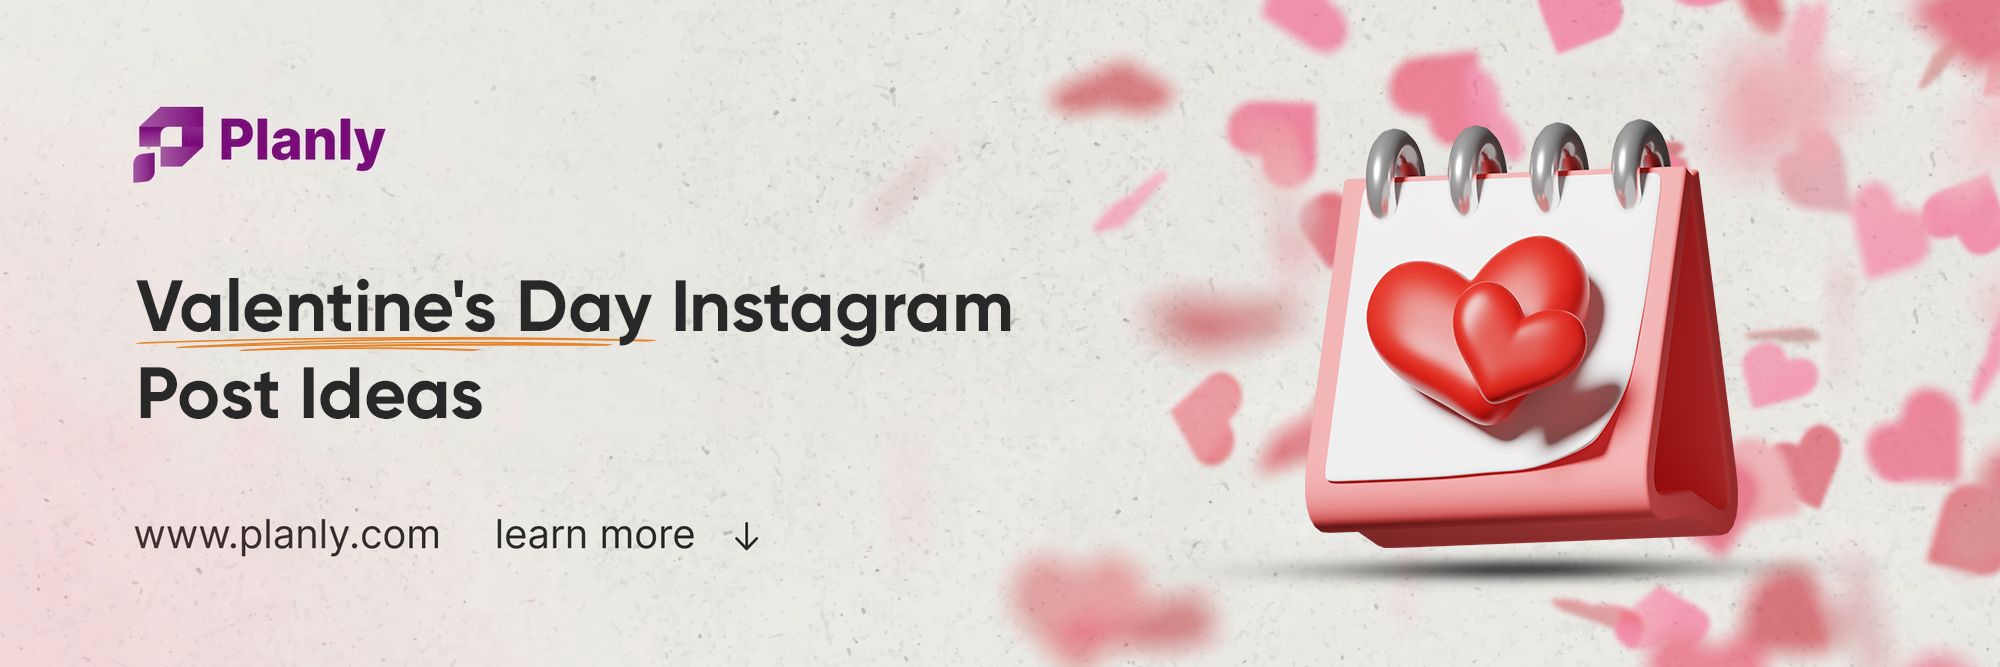 25 Instagram post ideas if you are single on Valentine's day